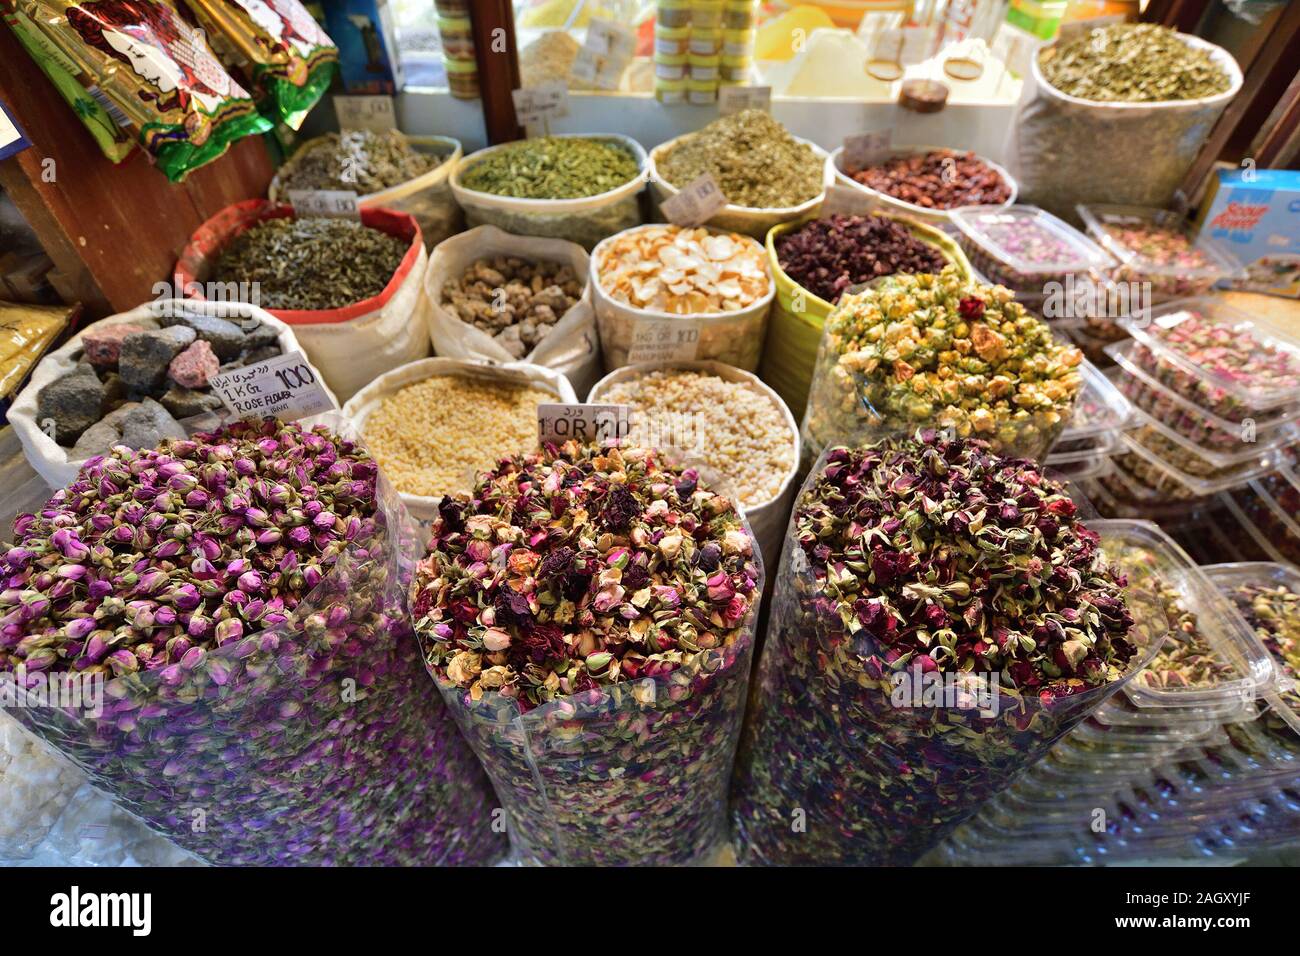 Doha, Qatar - Nov 21. 2019. Dry rose flowers and other spices on Souq Waqif - marketplace for selling traditional garments Stock Photo